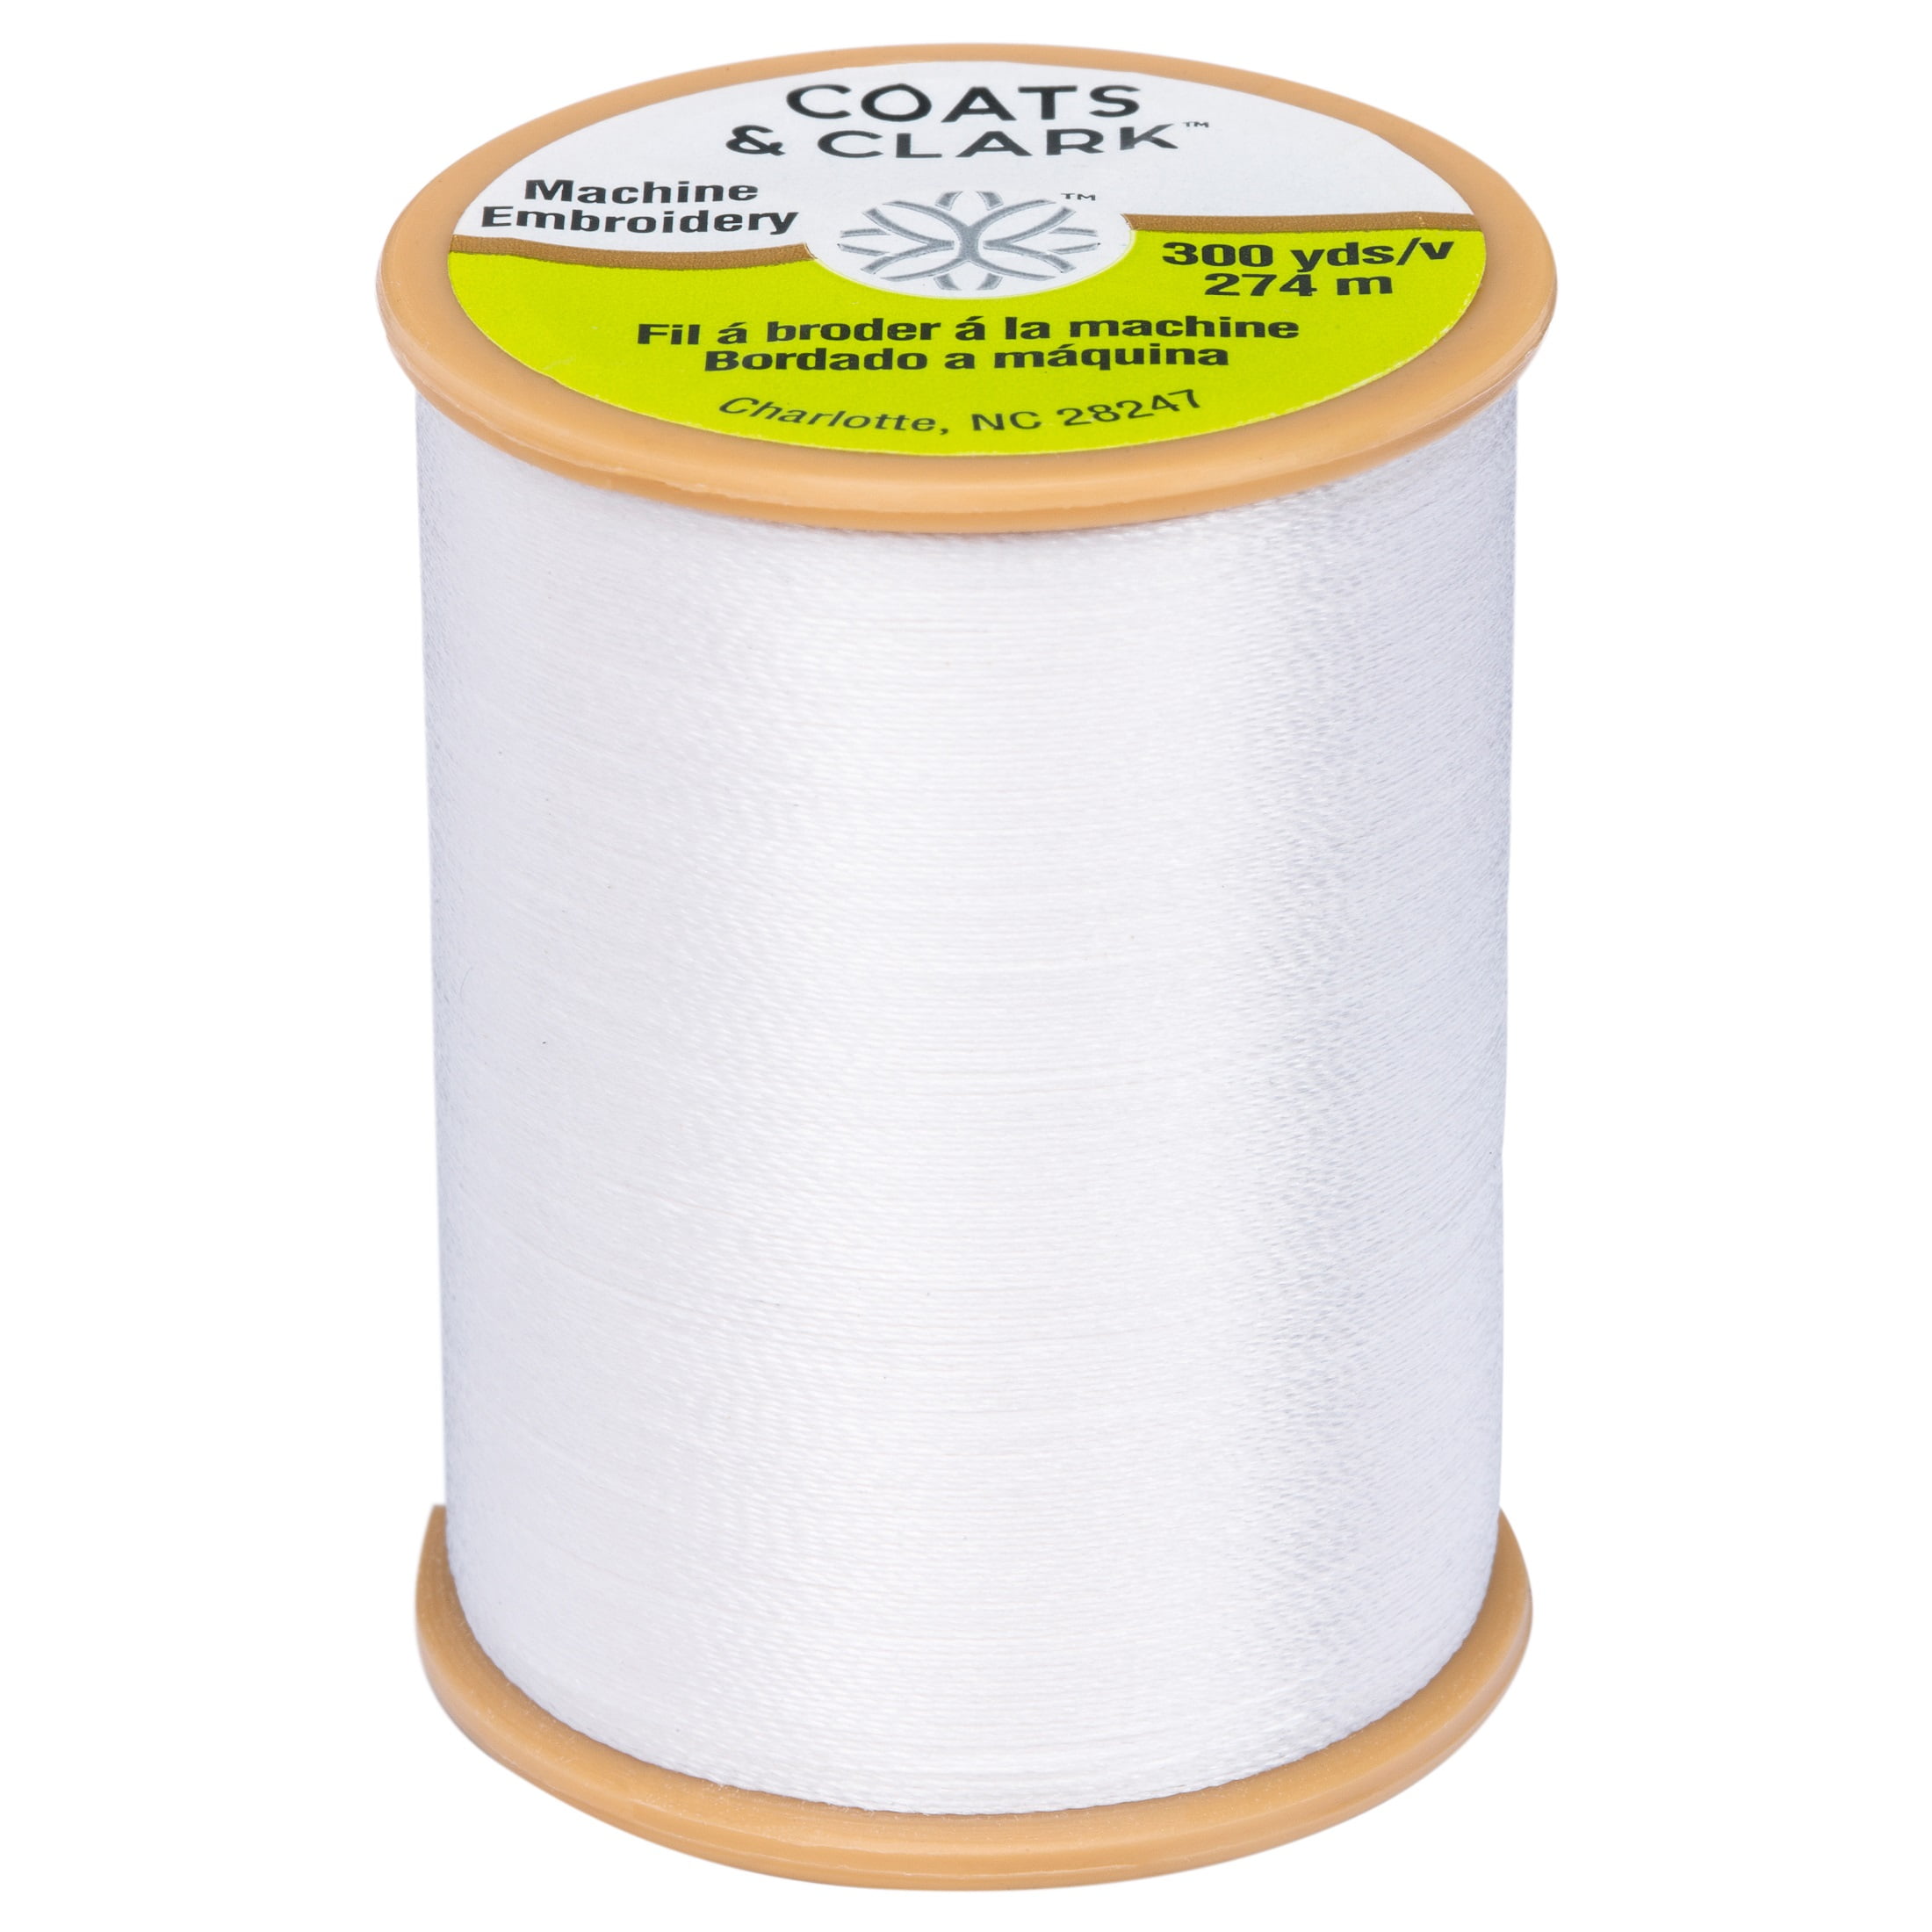 Coats & Clark Trilobal Embroidery White Polyester Thread, 300 Yards